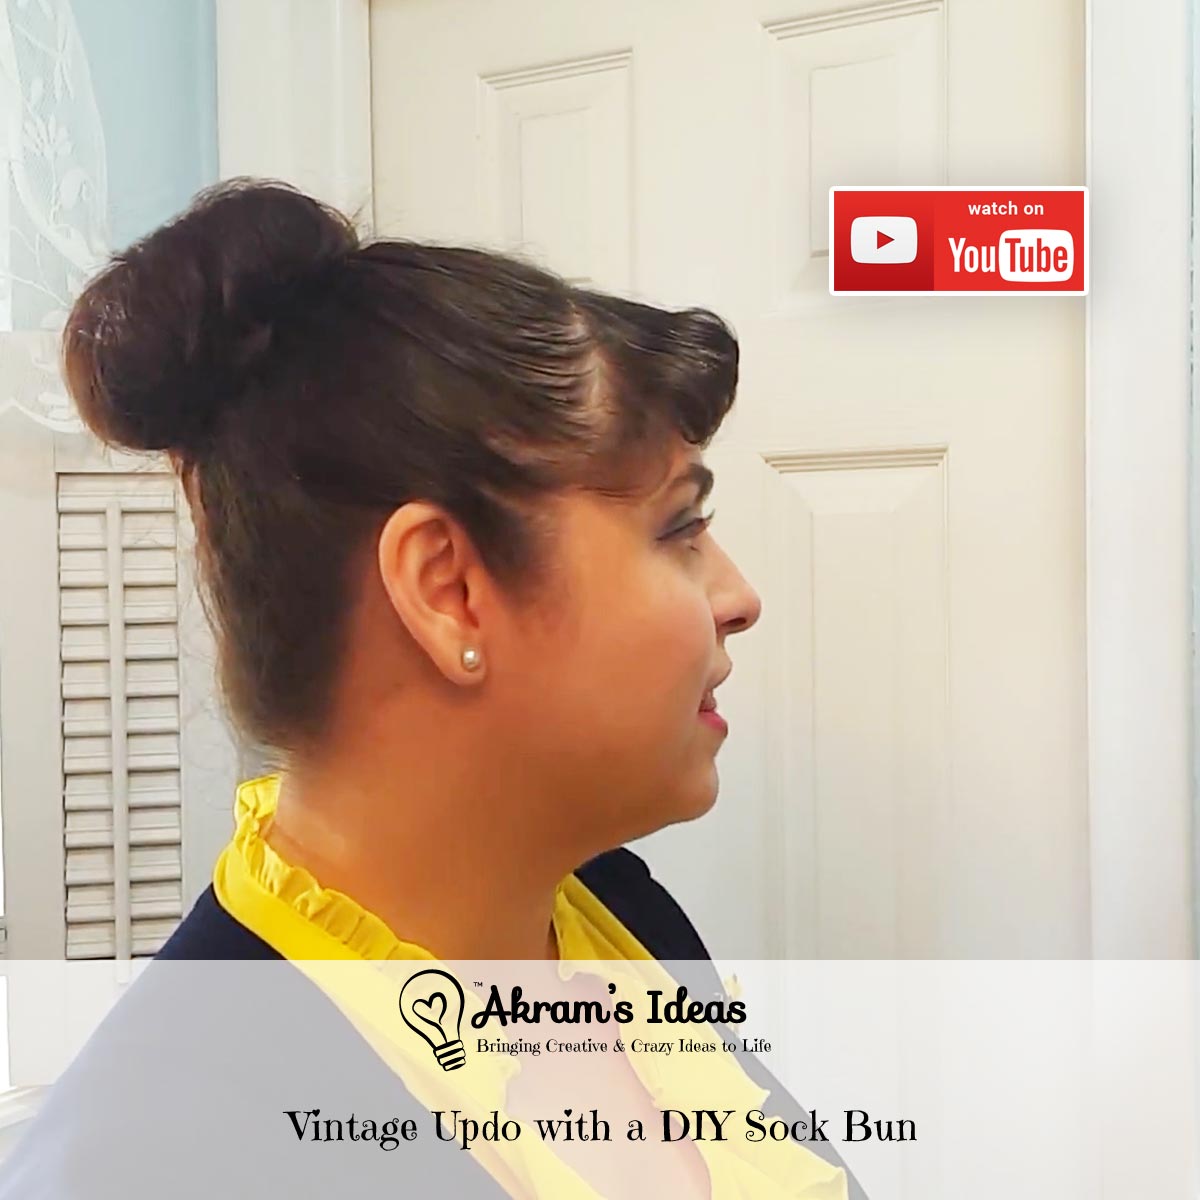 How-to video for creating your own DIY sock bun and style a classic vintage updo bun hair style.